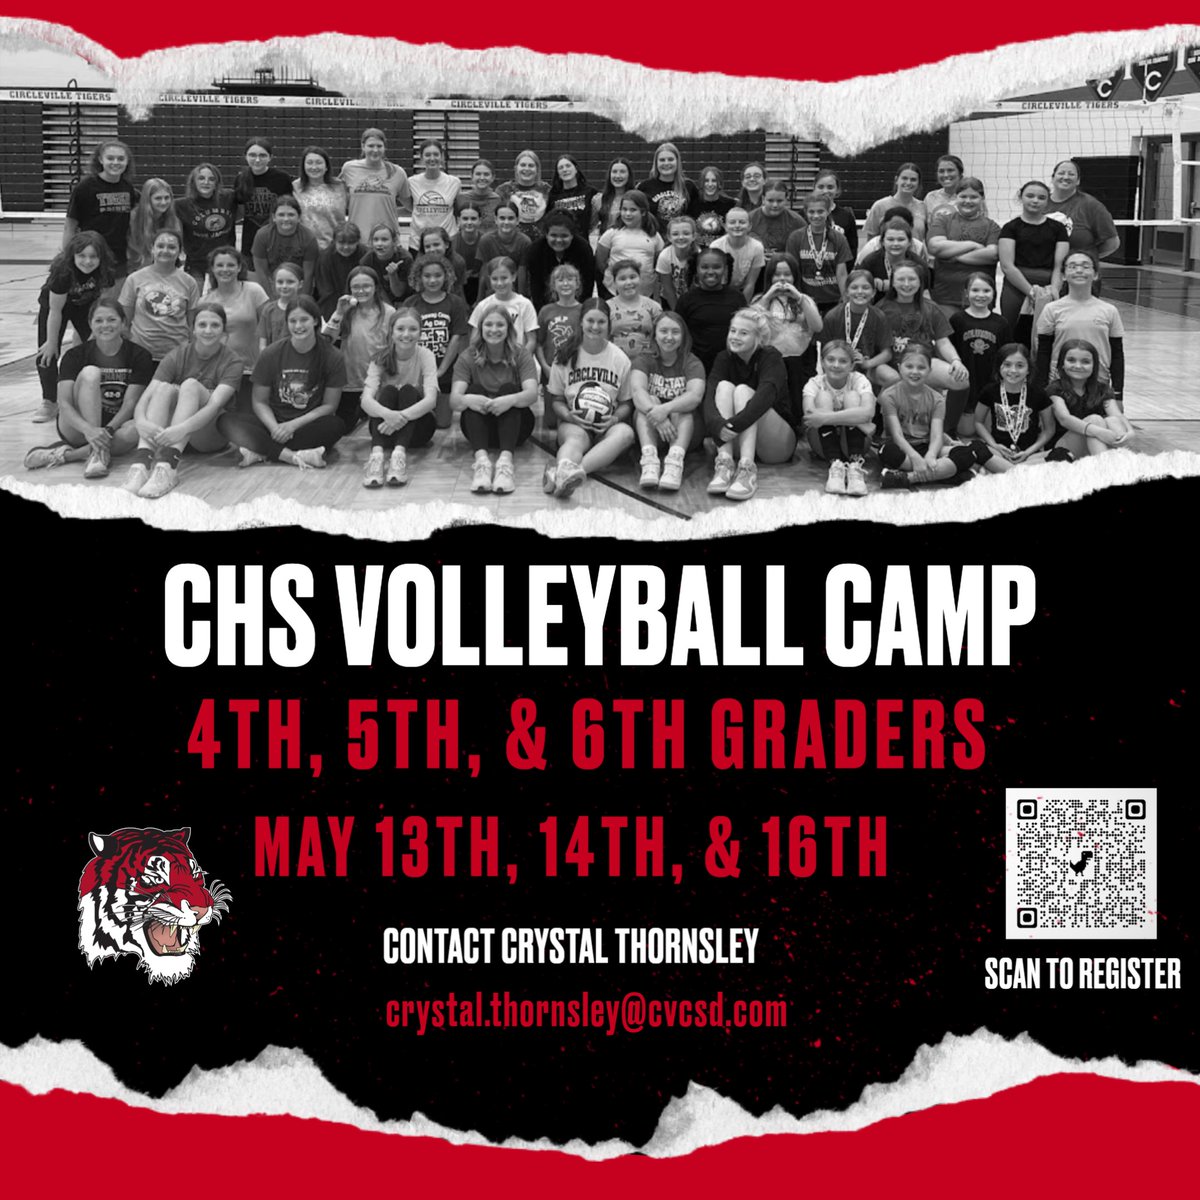 We would like to invite any incoming 4th, 5th, or 6th grade girl interested in learning about volleyball to our camp on May 13th, 14th, and 16th. Please click on the link provided to register! forms.gle/ojbaM8vdC8KYni…